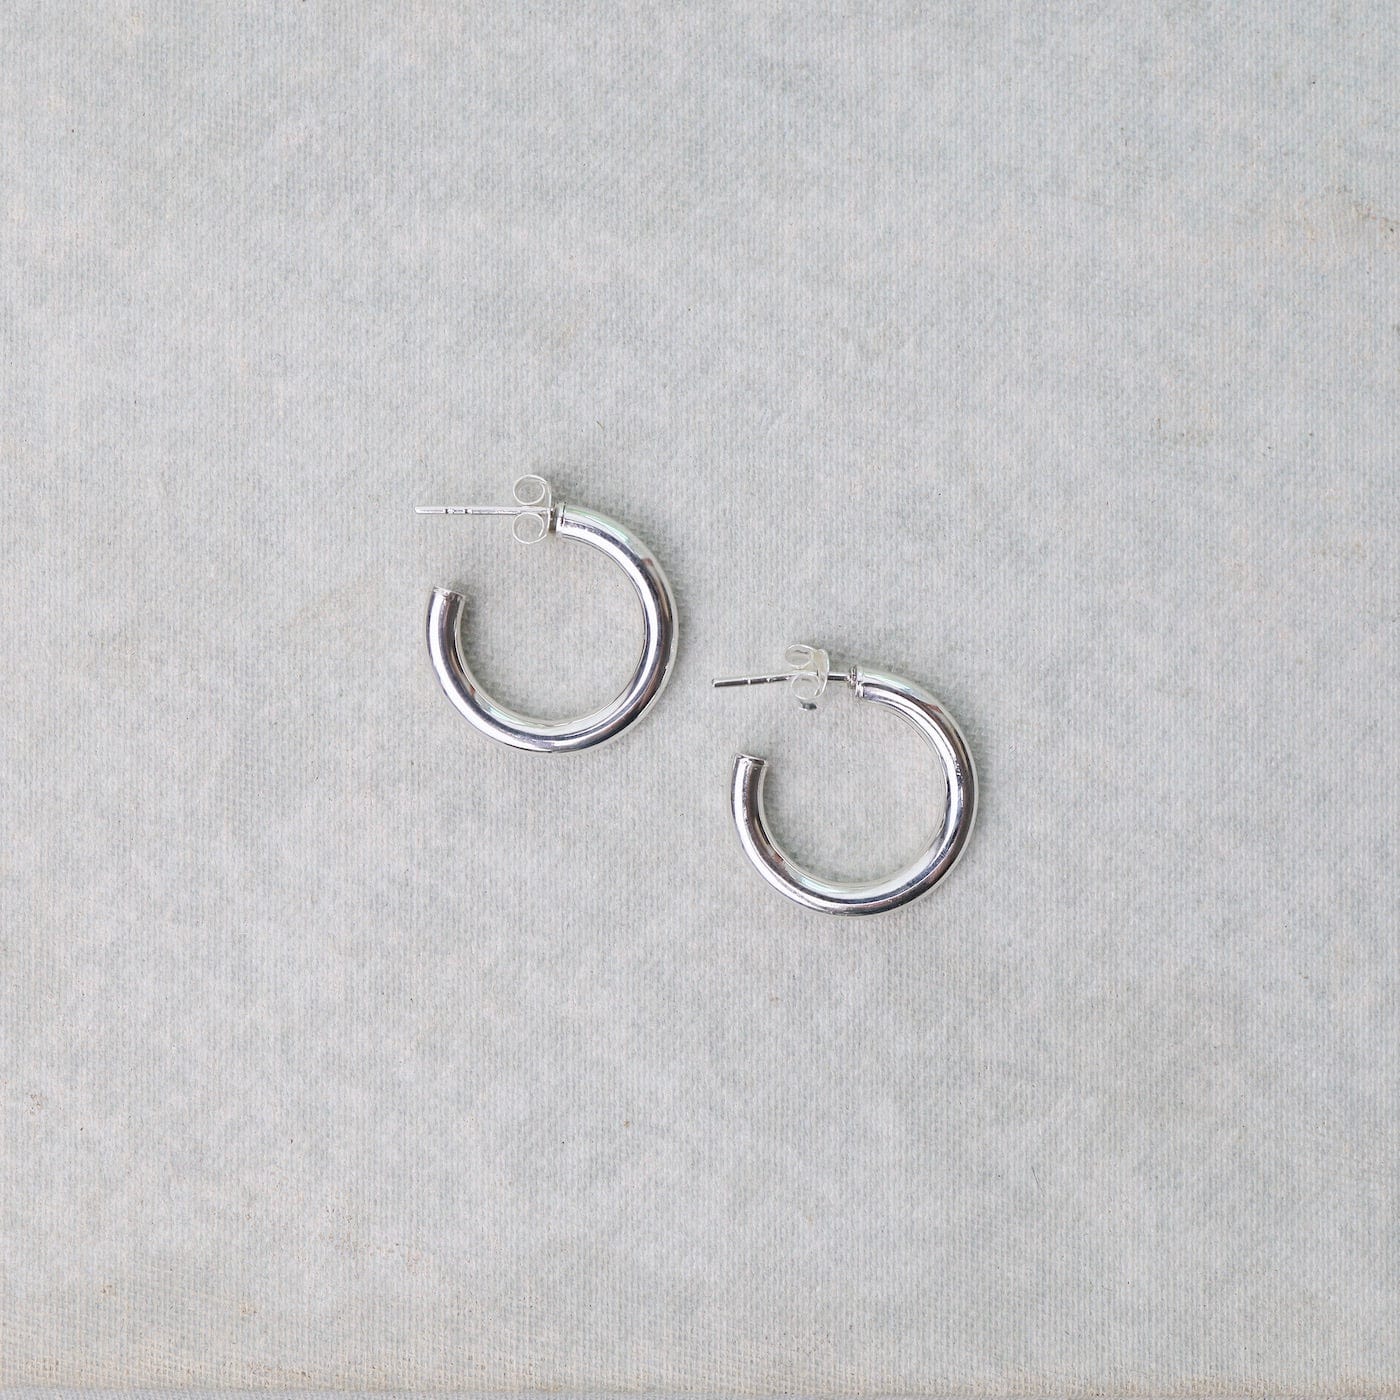 EAR 18mm Round Hoops on Posts